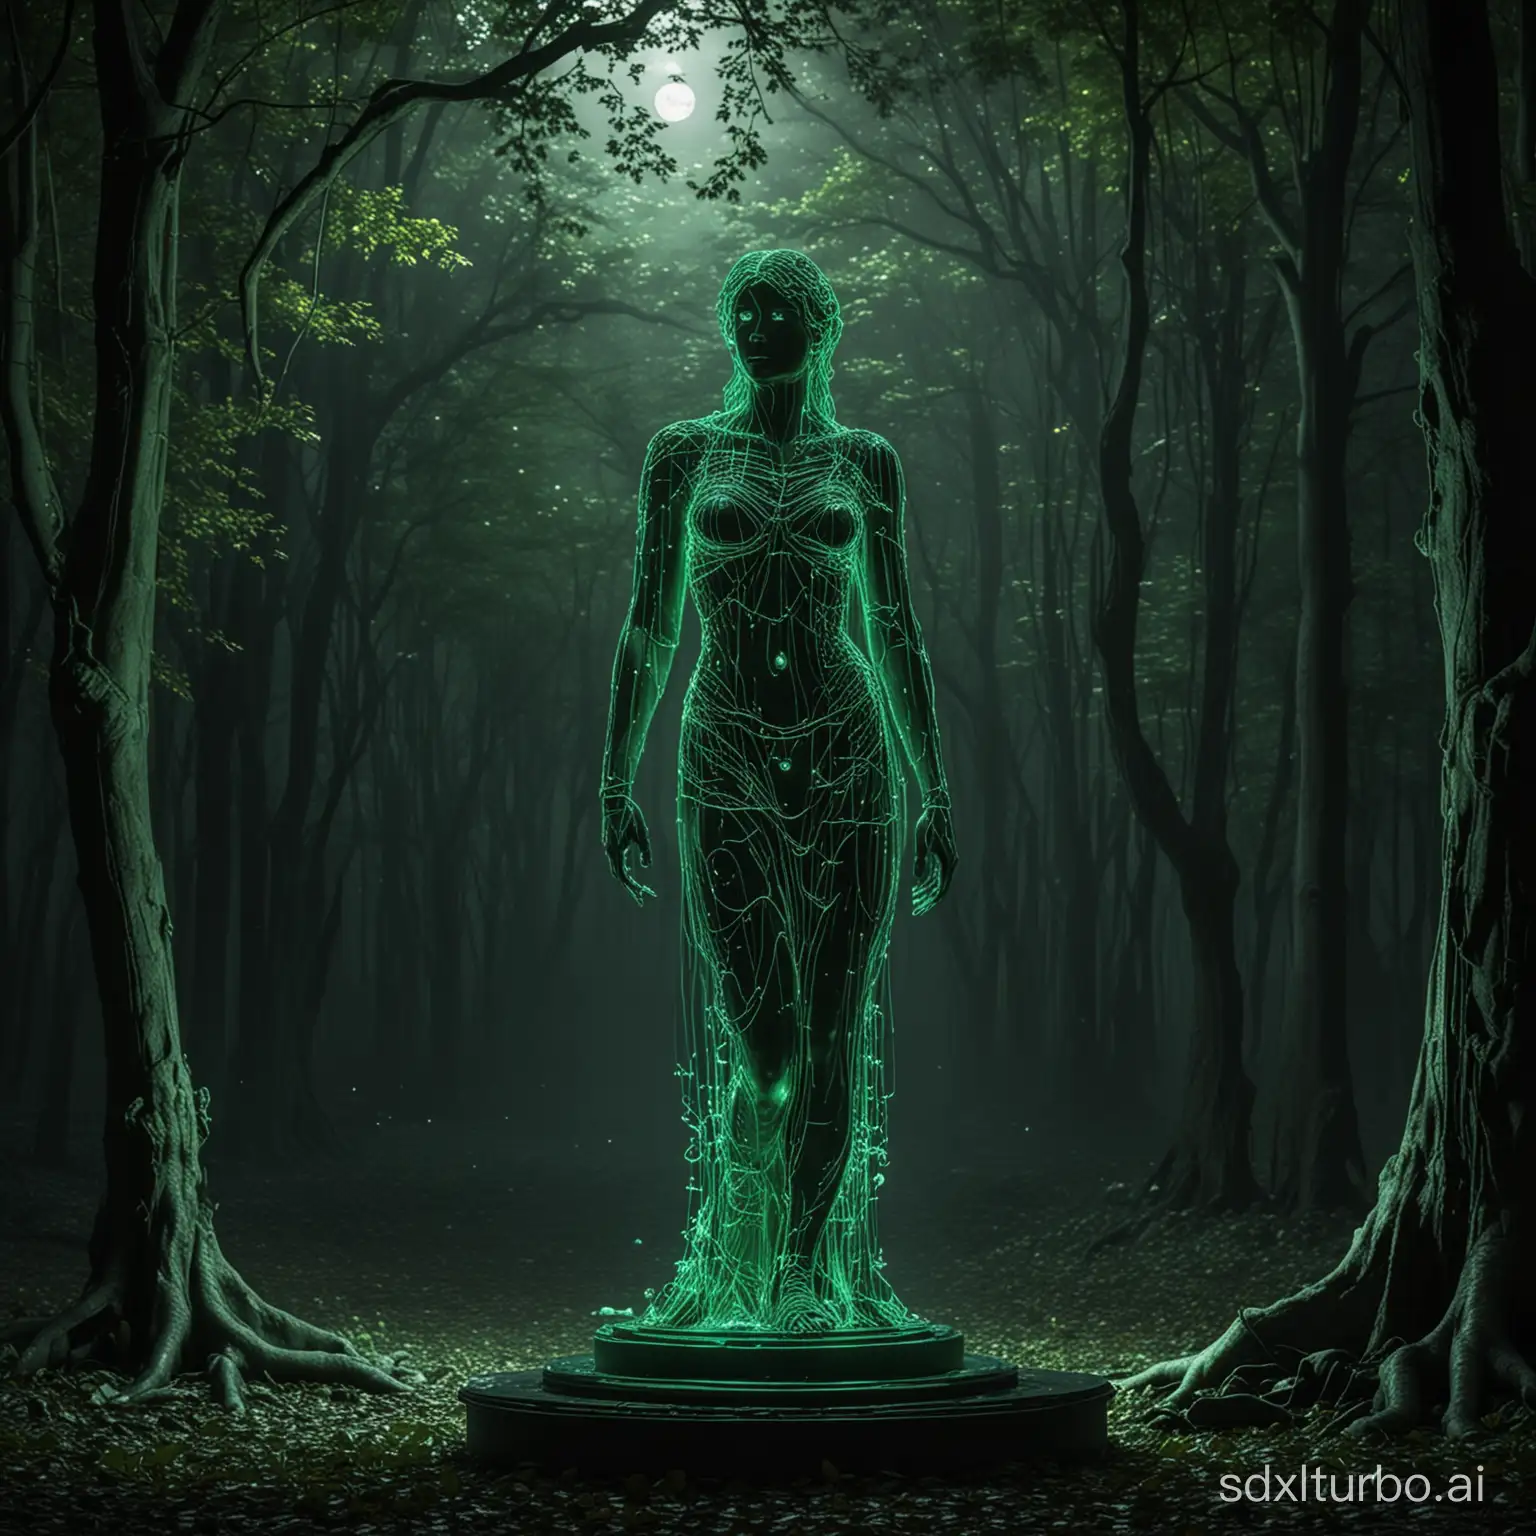 in the dark night,a green light glowing,sculpture,light shines on the sculpture,surrounding by all kinds of trees,, (masterpiece:1.3), (best quality:1.3), (high resolution:1.2), (high detail:1.2),